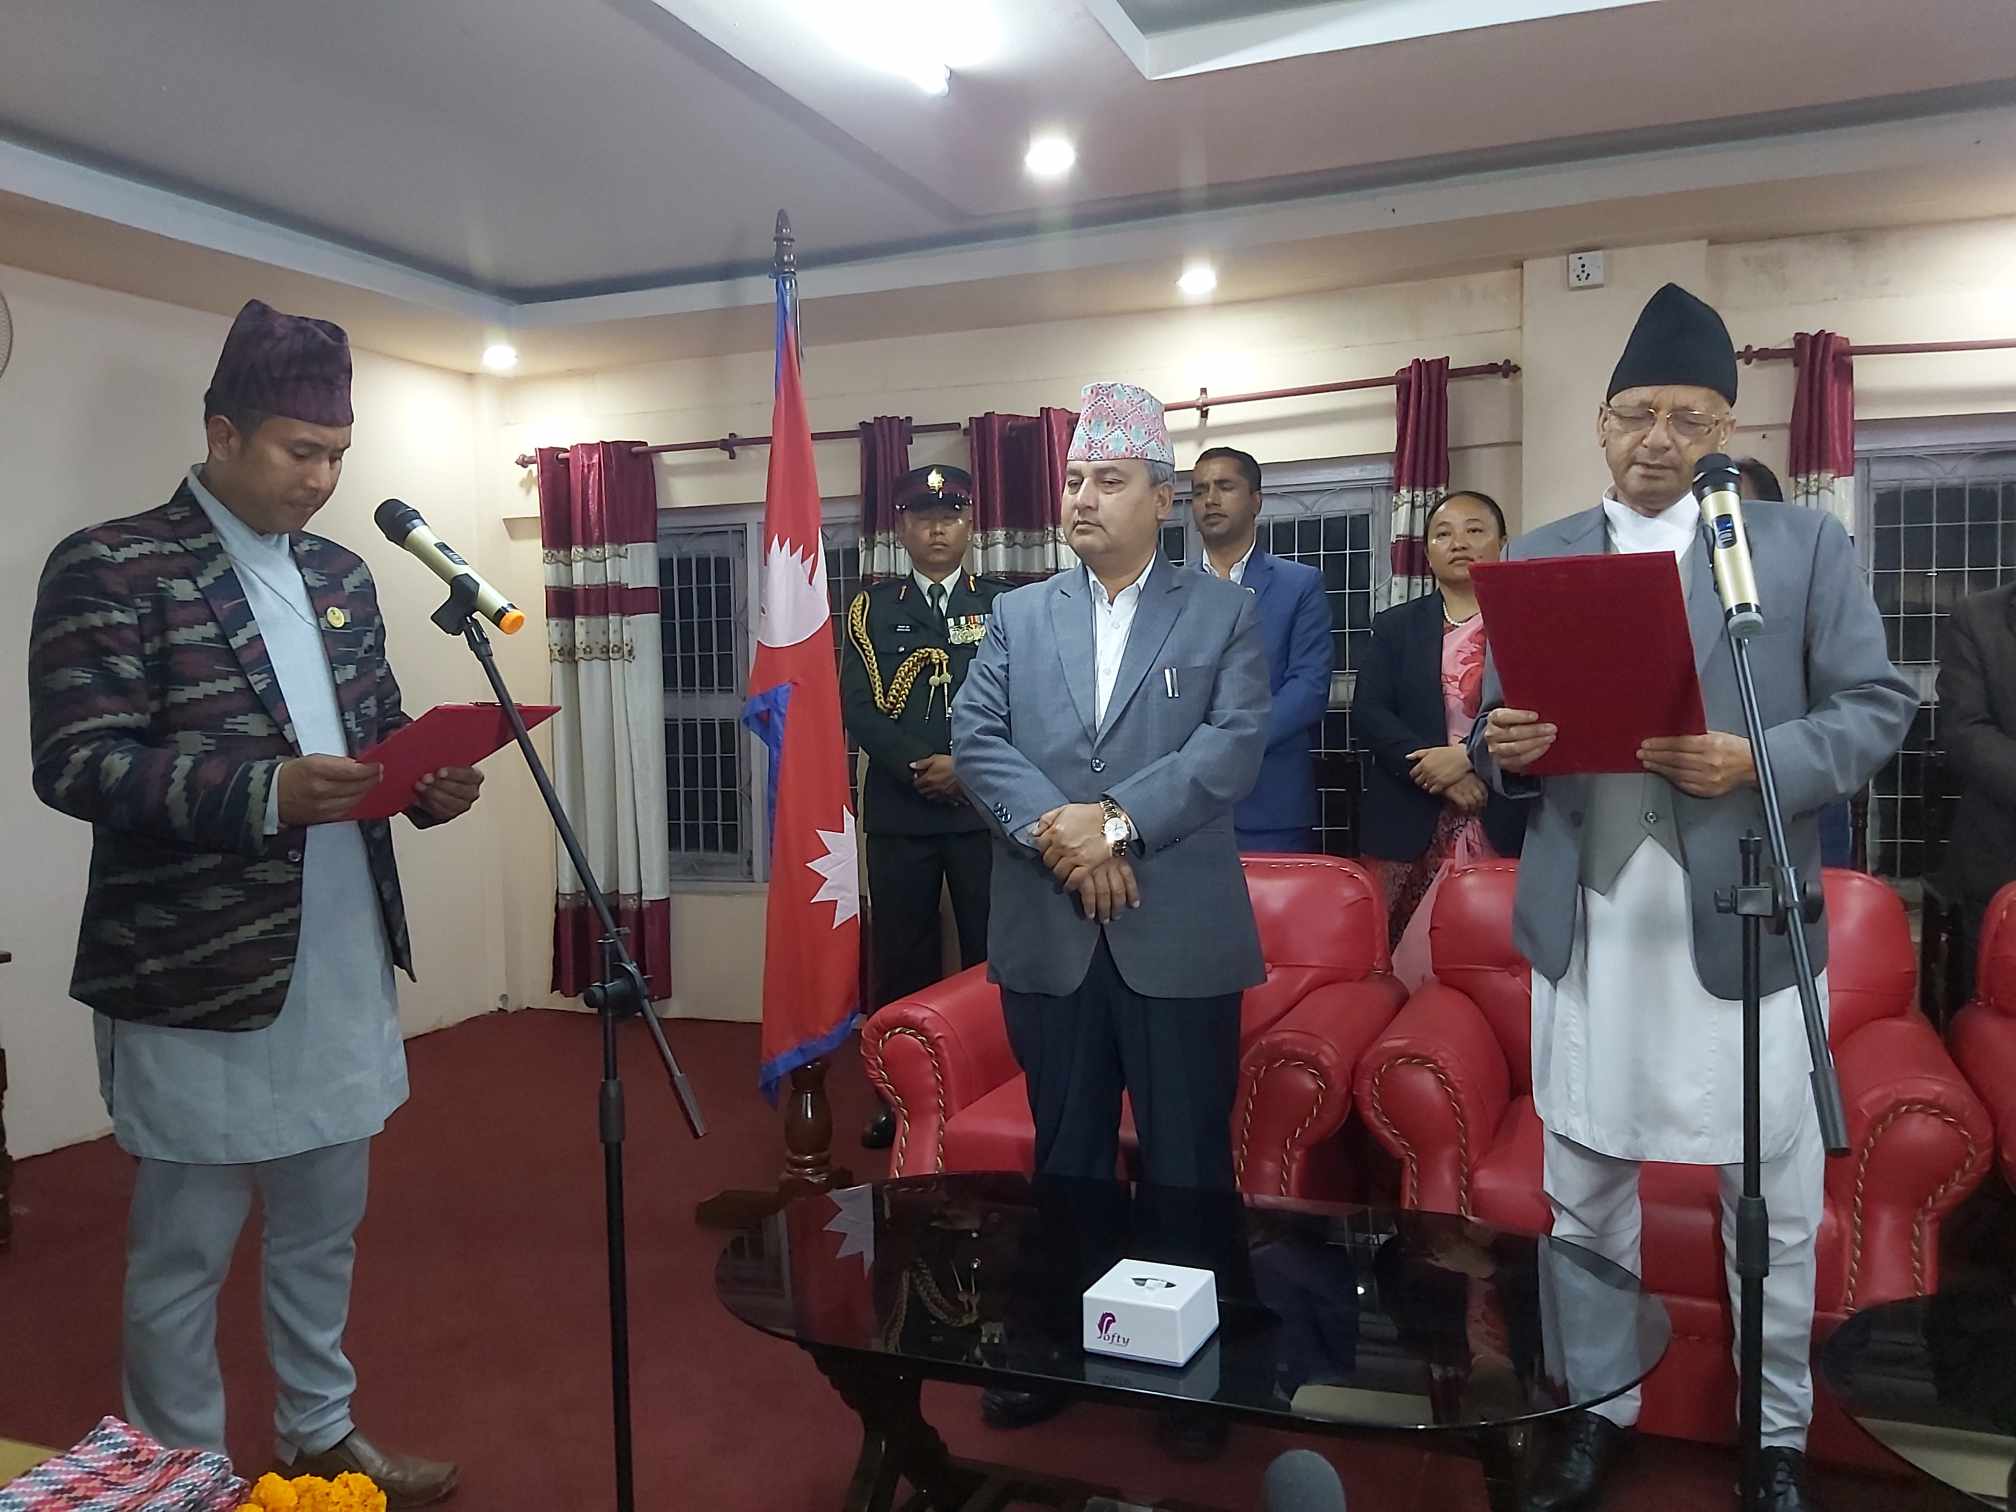 Bhajracharya sworn in as Tourism Minister in Bagmati Province